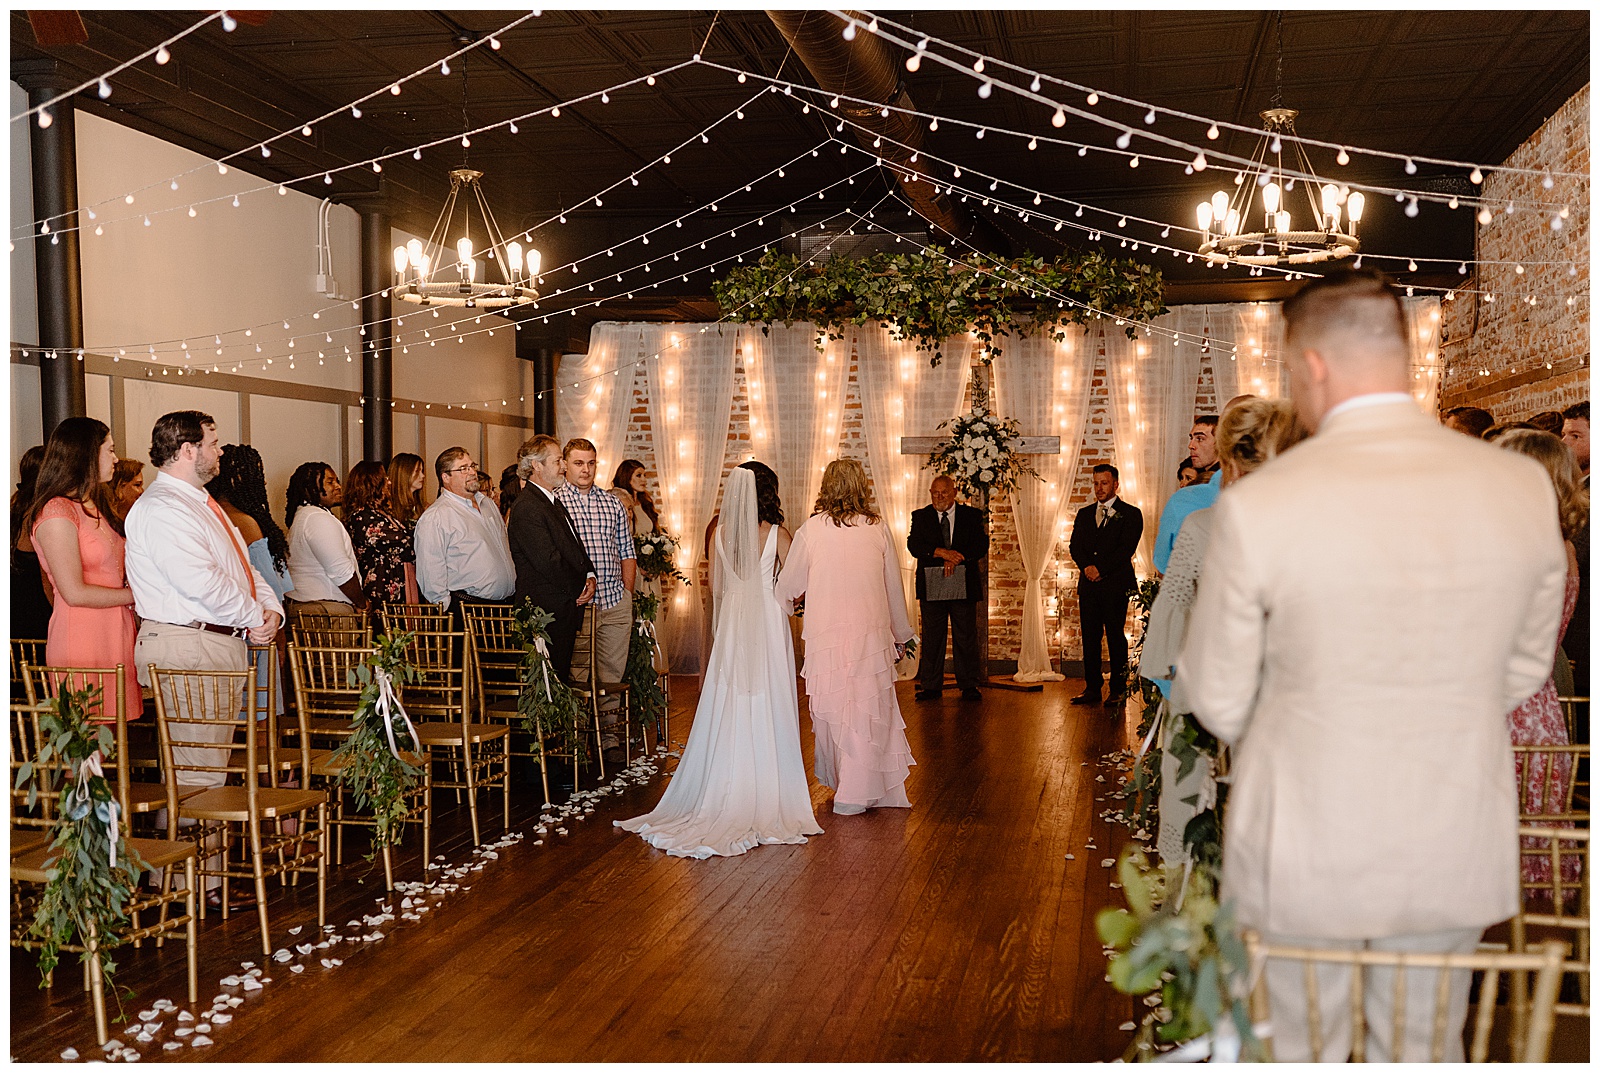 Bakery 1818 rustic modern ceremony site with twinkling lights